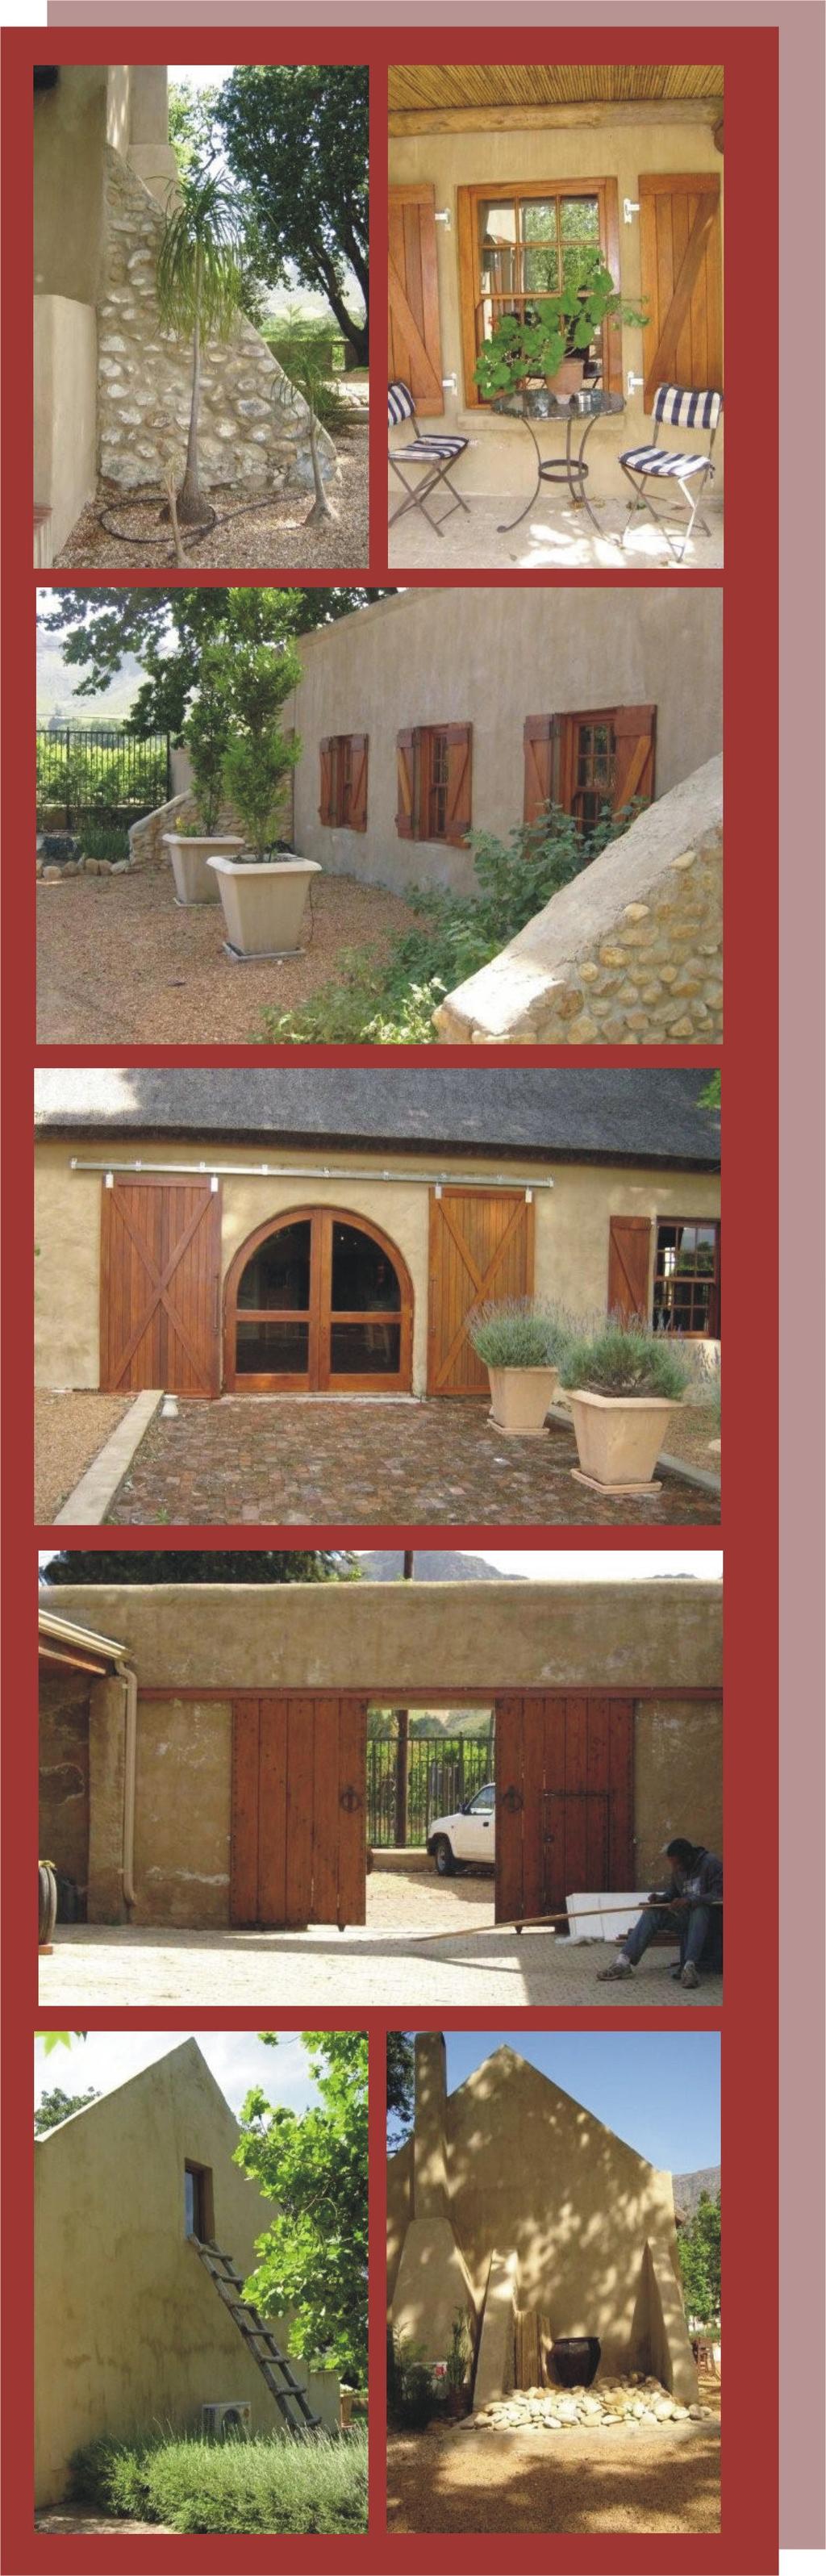 1.2 Origin of Architecture The origins of the planning principles embodied in the guidelines are found in many forms of traditional architecture in the greater Stellenbosch heritage area (Reference: